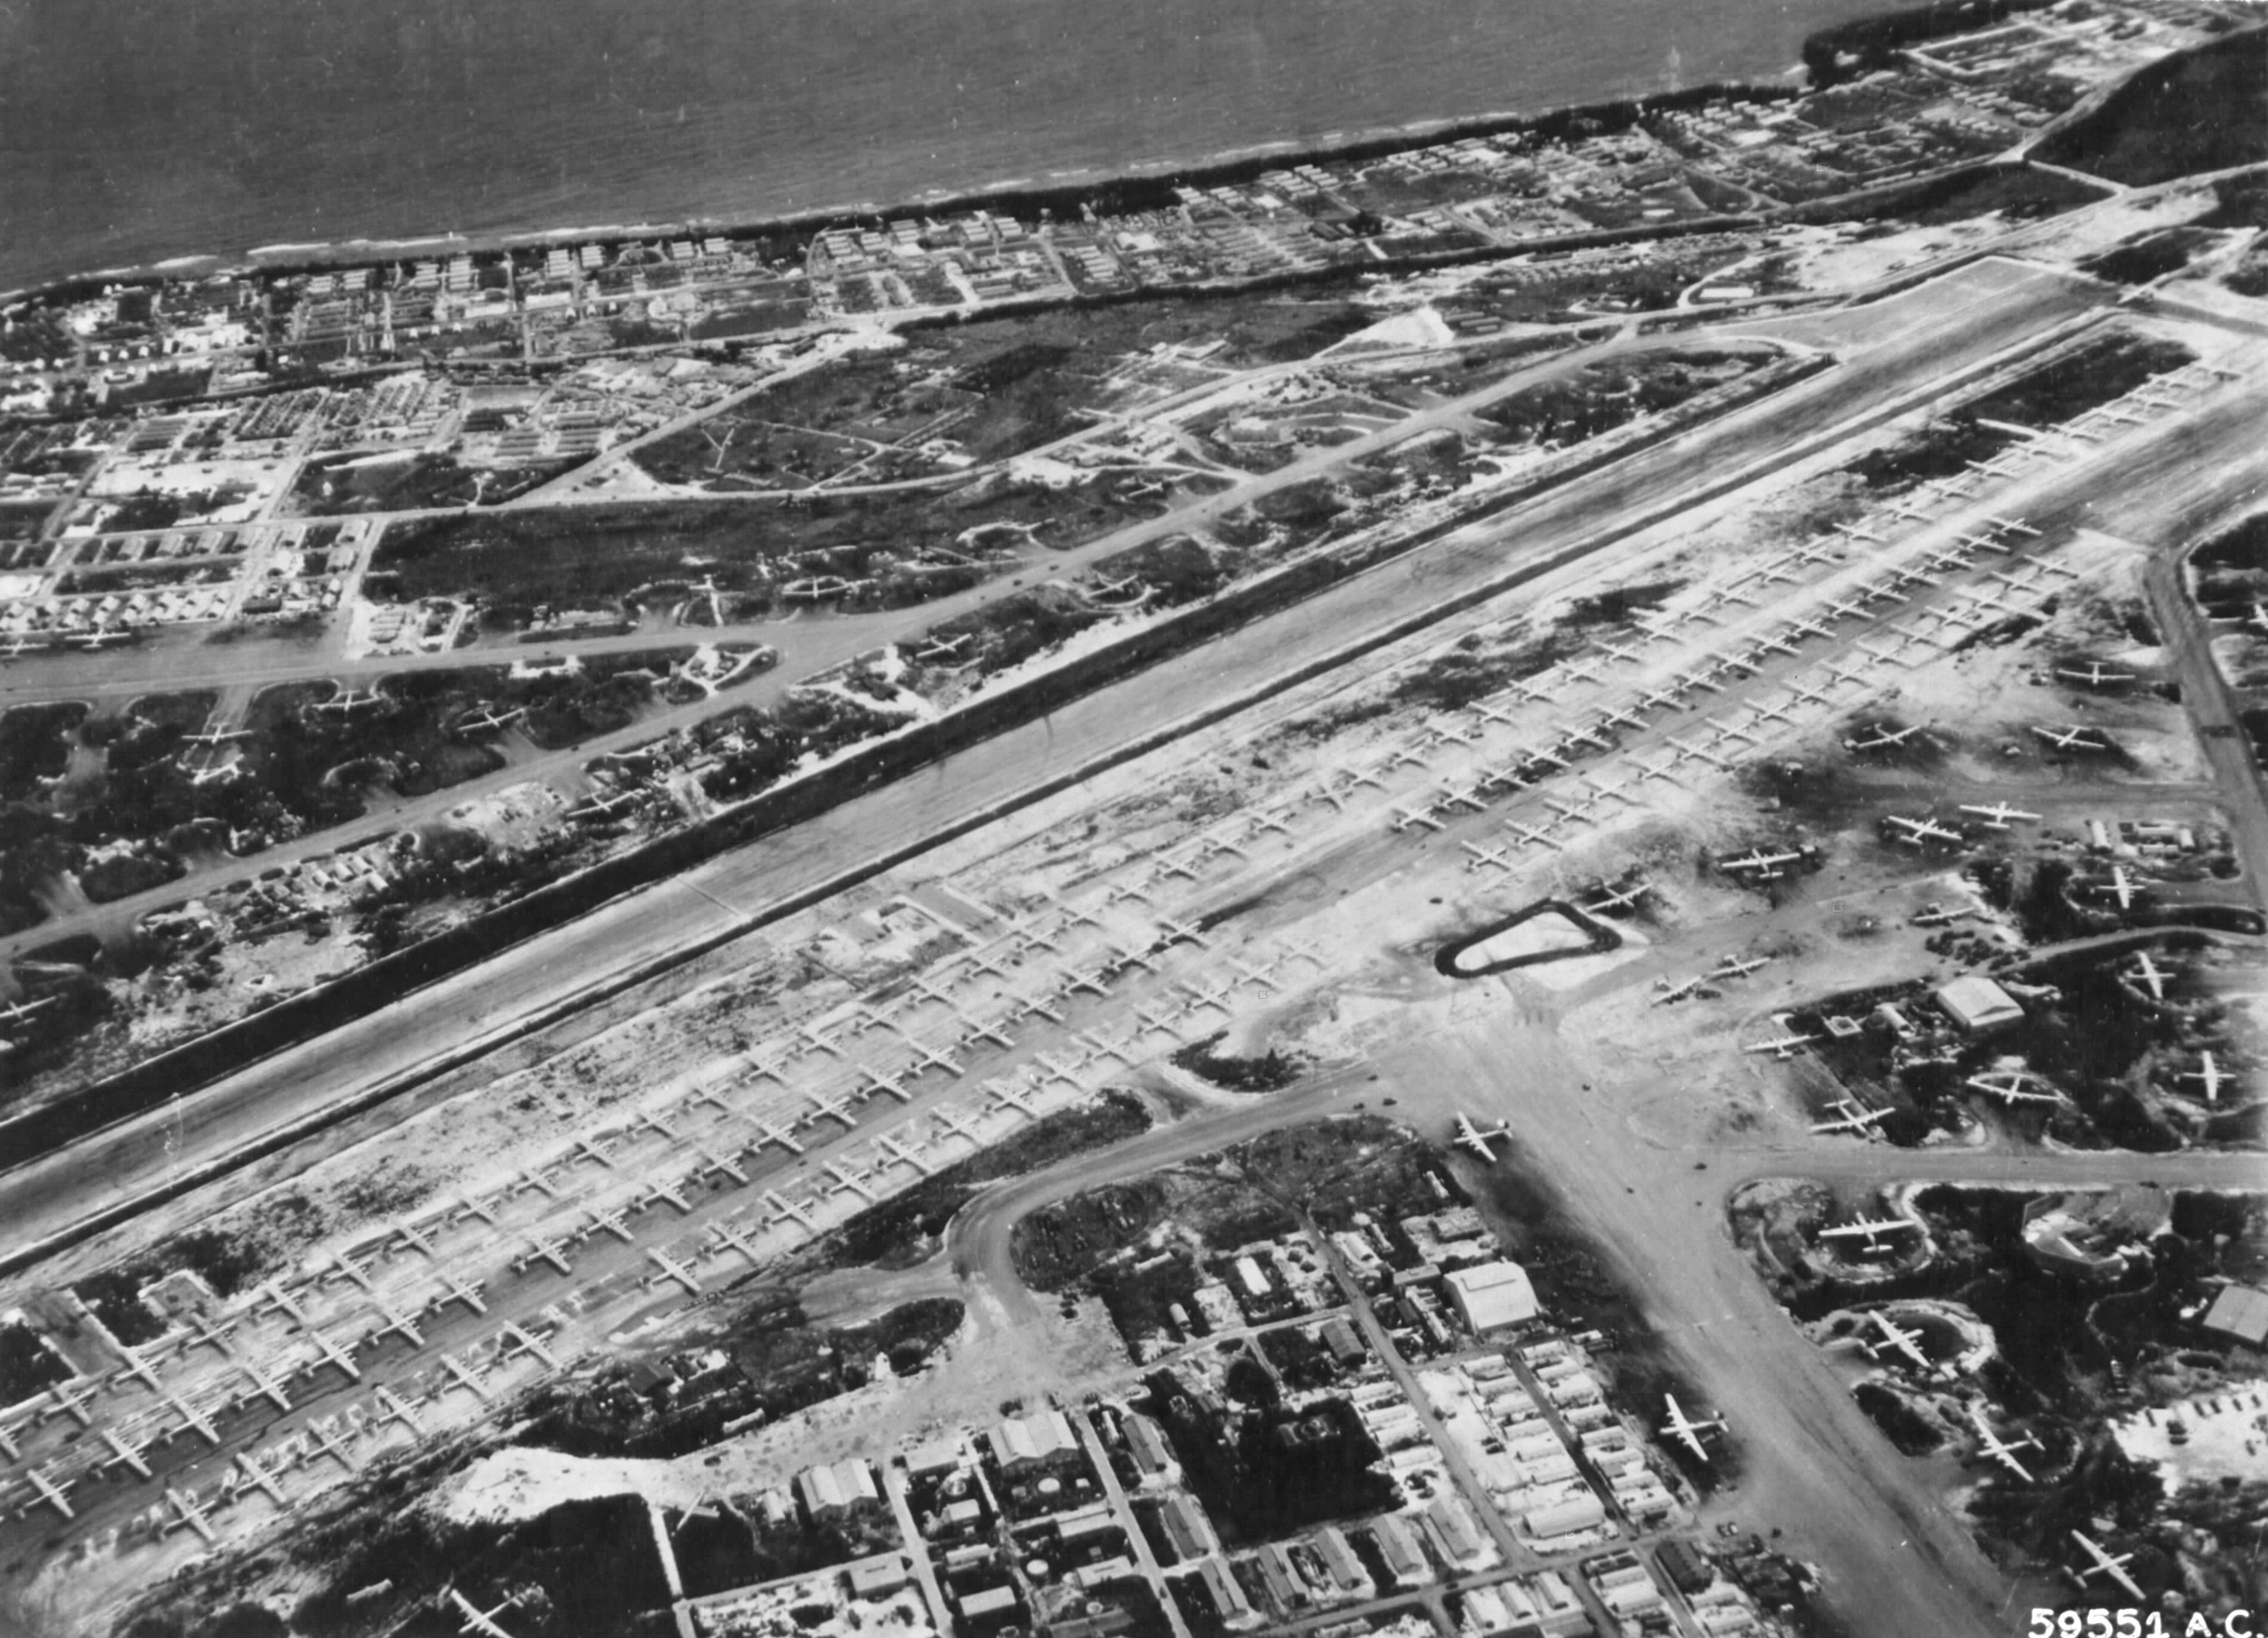 119 B-29 Superfortress bombers of the 73rd Bomb Wing lined up on Baker runway, Isley Field, Saipan, Mariana Islands, Sep 1945 with 35 more B-29s seen in the periphery.